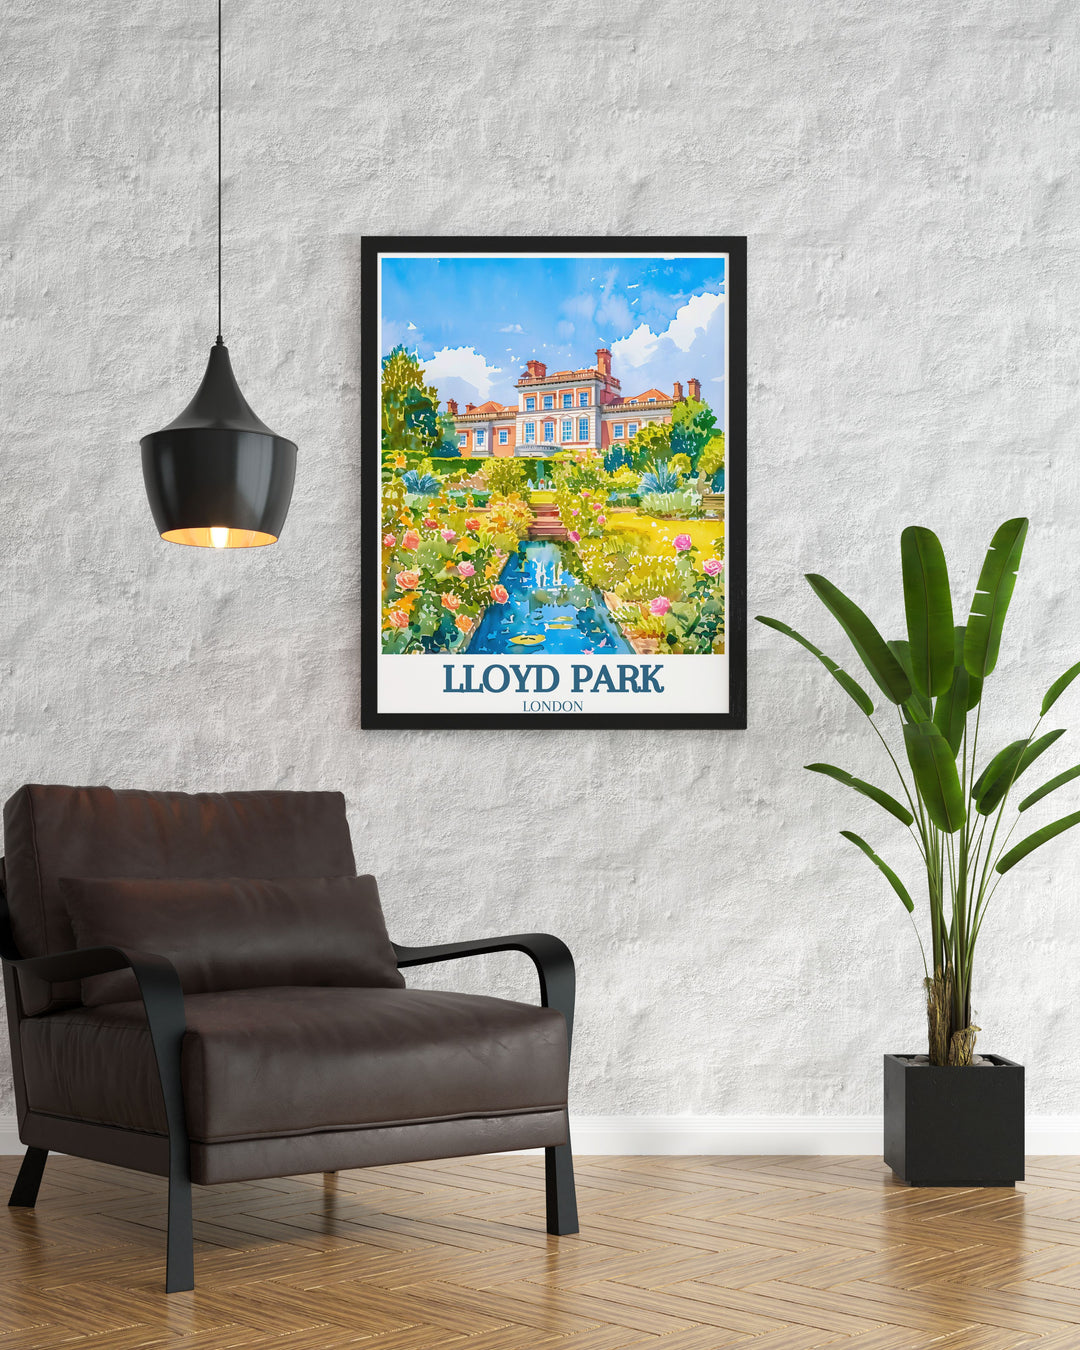 Lloyd Park poster showcasing the stunning rose garden at William Morris gallery in East London. Celebrate Walthamstows artistic heritage with this elegant print. Ideal for London museums or personal home decor. A timeless piece of rose garden artwork for any collection.